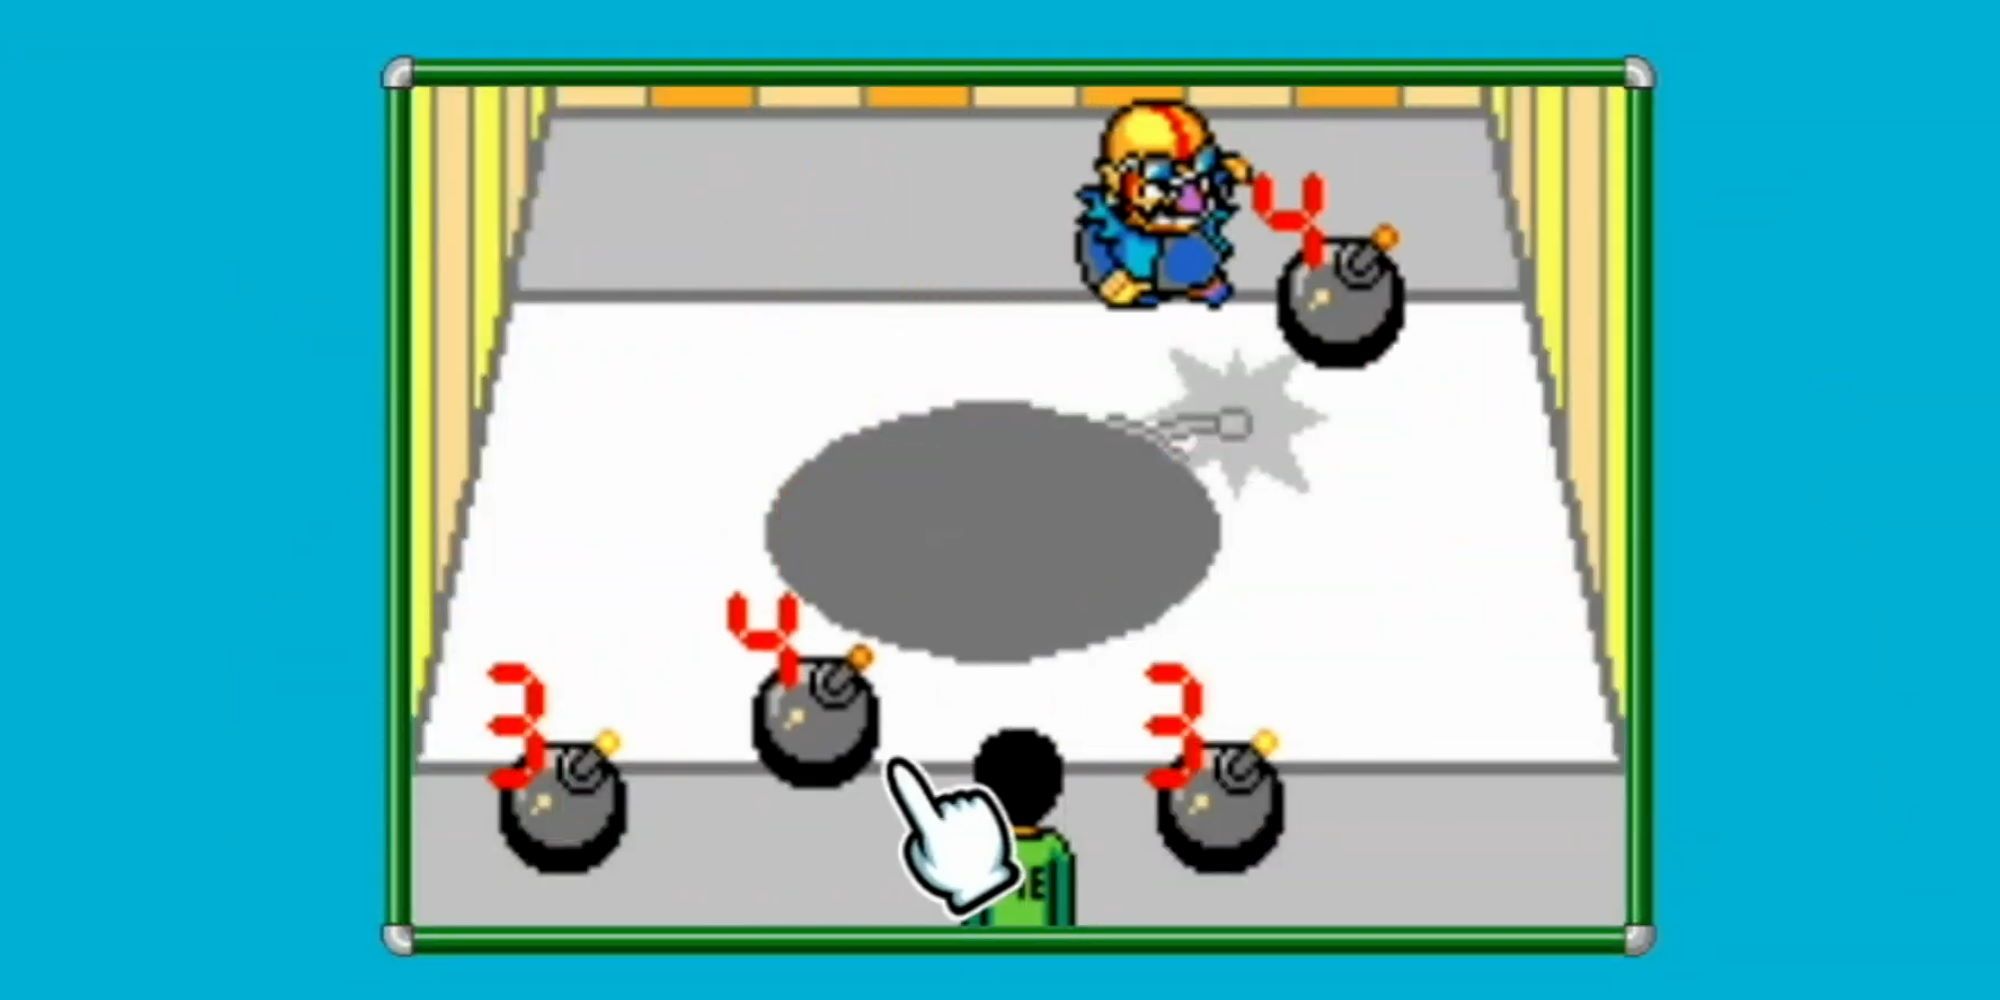 Wario and a random person labelled 'ME' with bombs and timers on then. A bomb image can be seen on the floor.